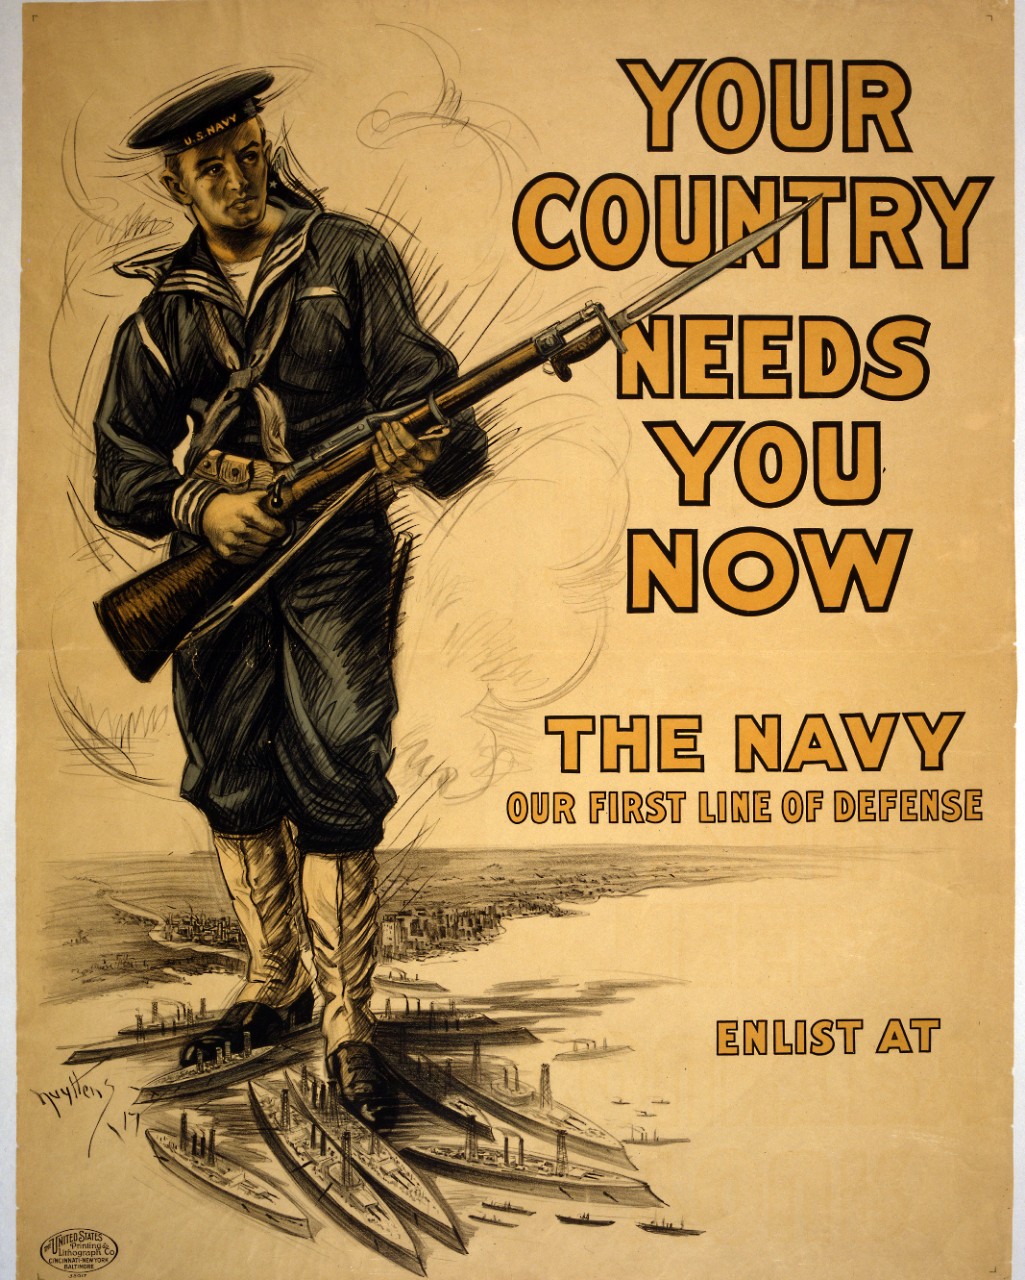 <p>LC-USZC4-10780: WWI Recruiting Poster. “Your Country Needs You Now – The Navy, Our First Line of Defense. Artwork by Nuyttens, 1917.&nbsp;</p>
